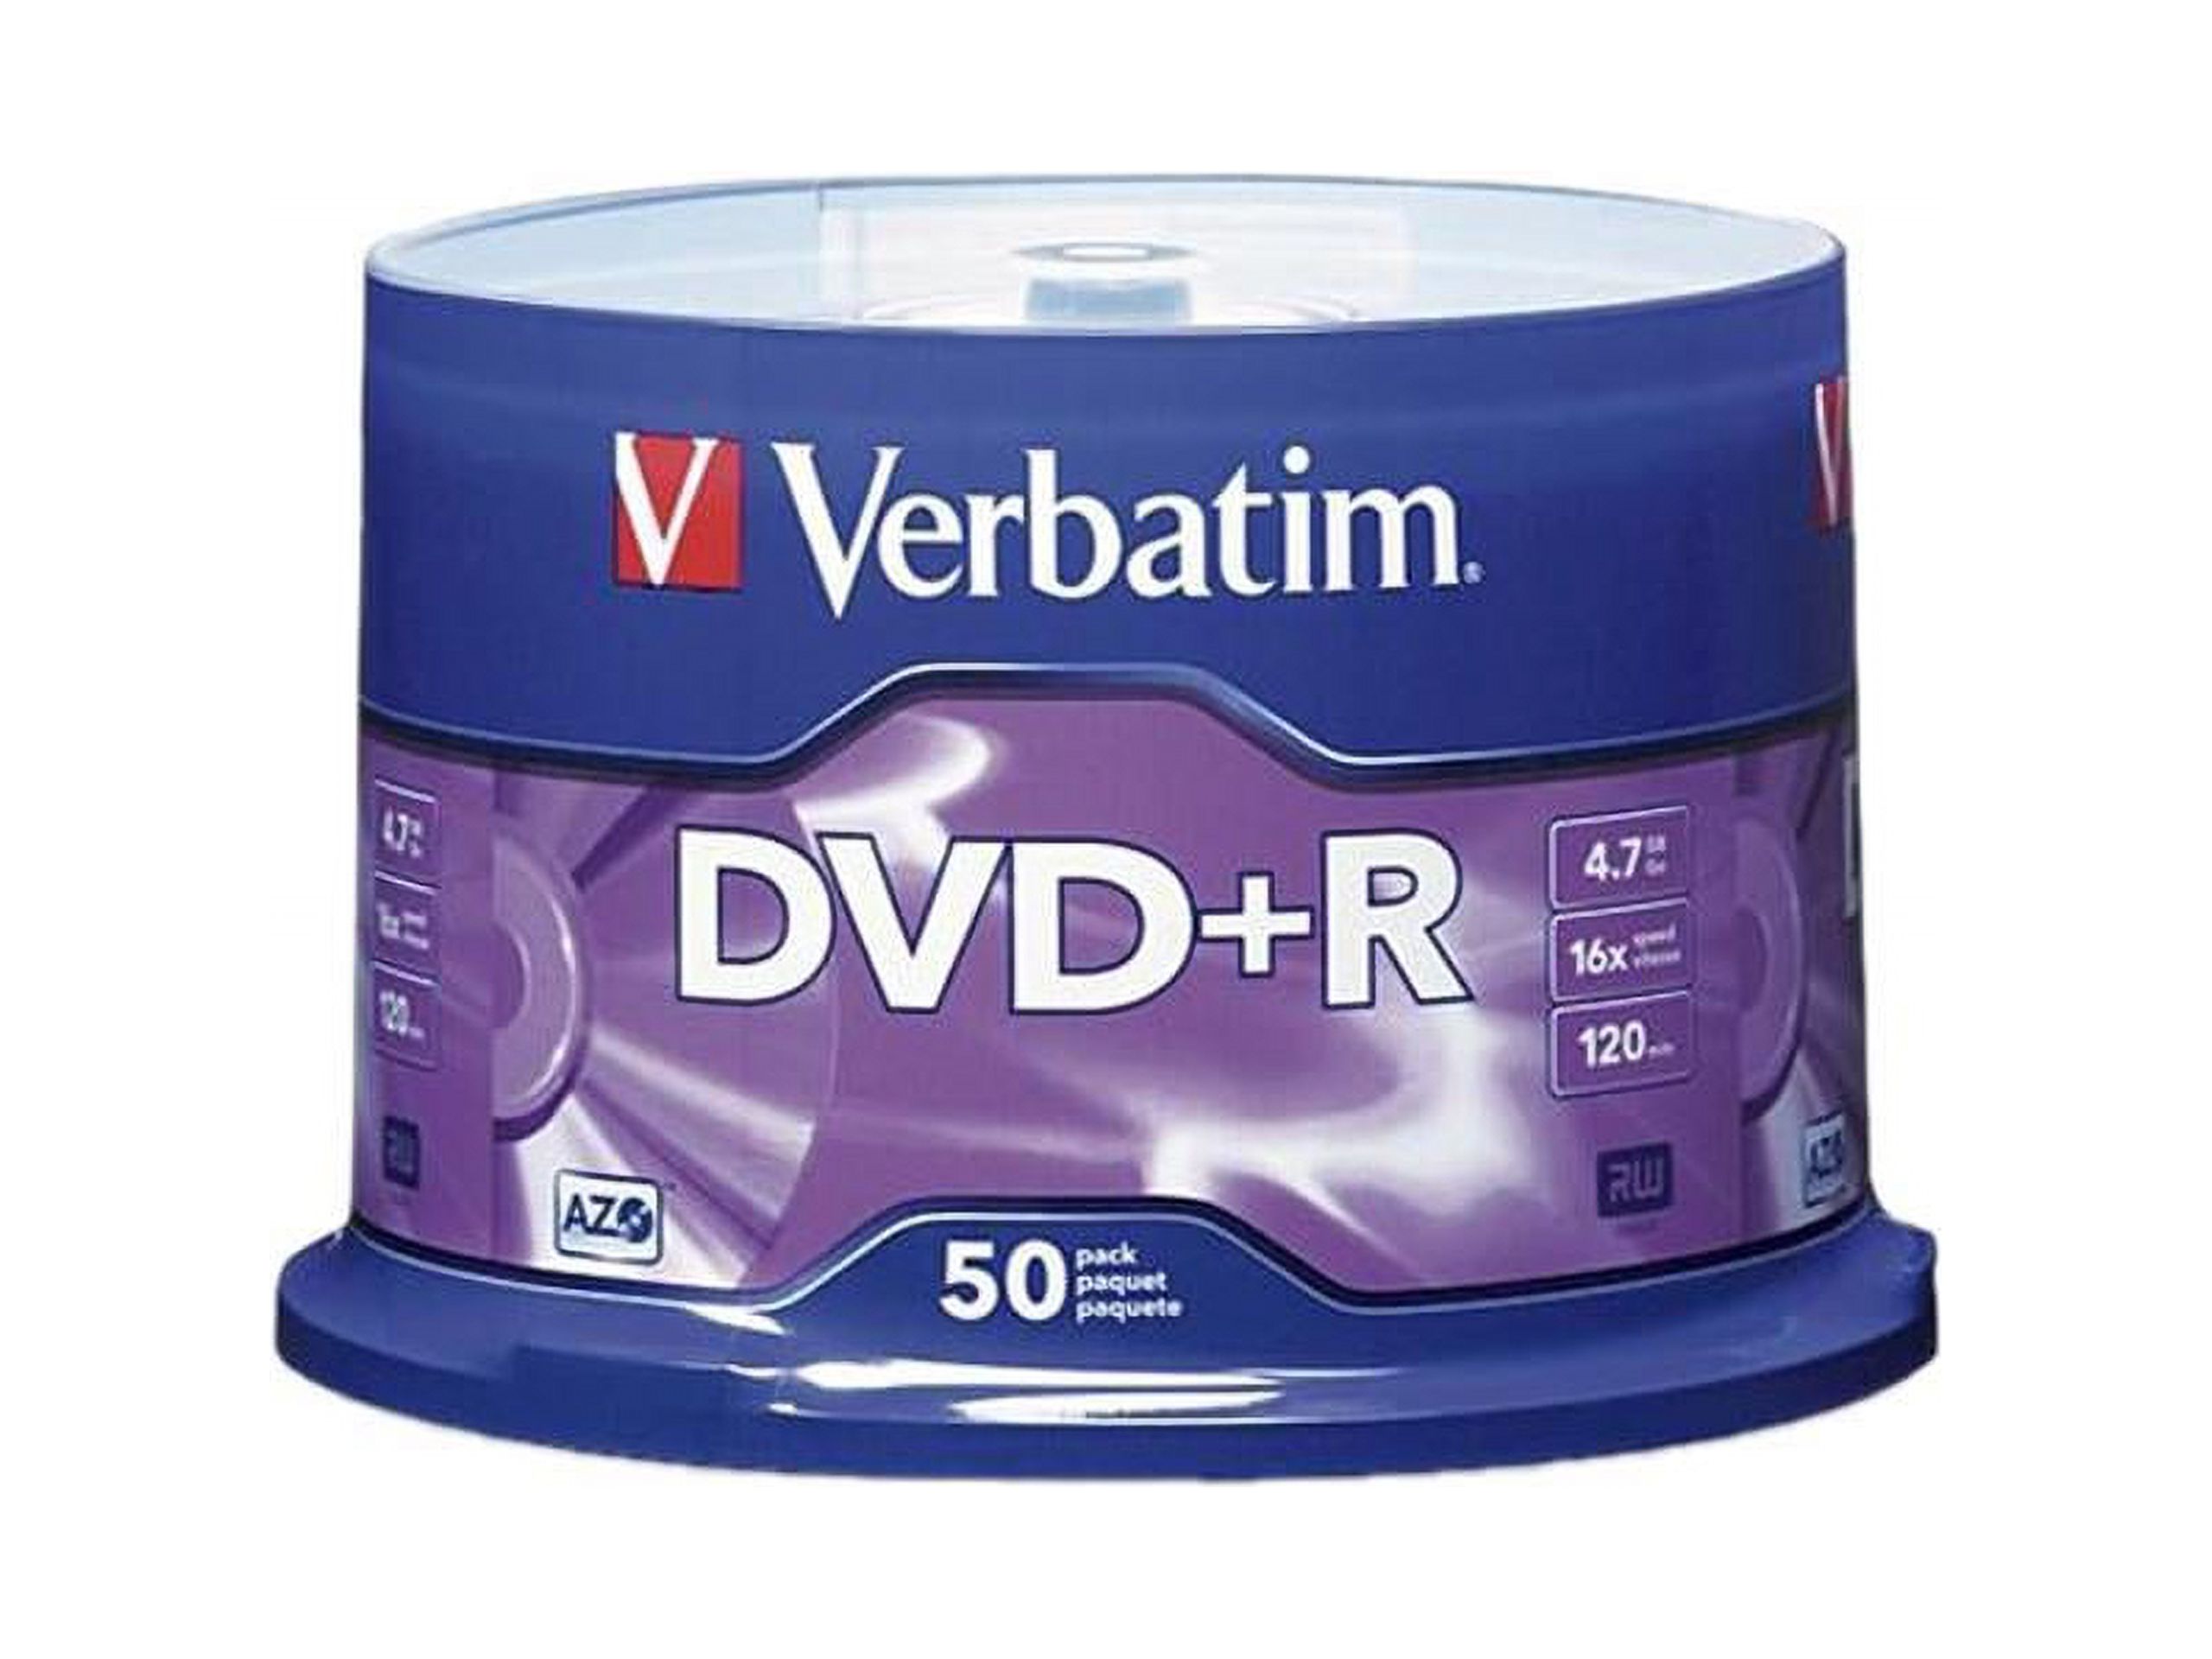 Verbatim AZO DVD+R 4.7GB 16X with Branded Surface - 50pk Spindle - 120mm - Single-layer Layers - 2 Hour Maximum Recording Time - image 1 of 3